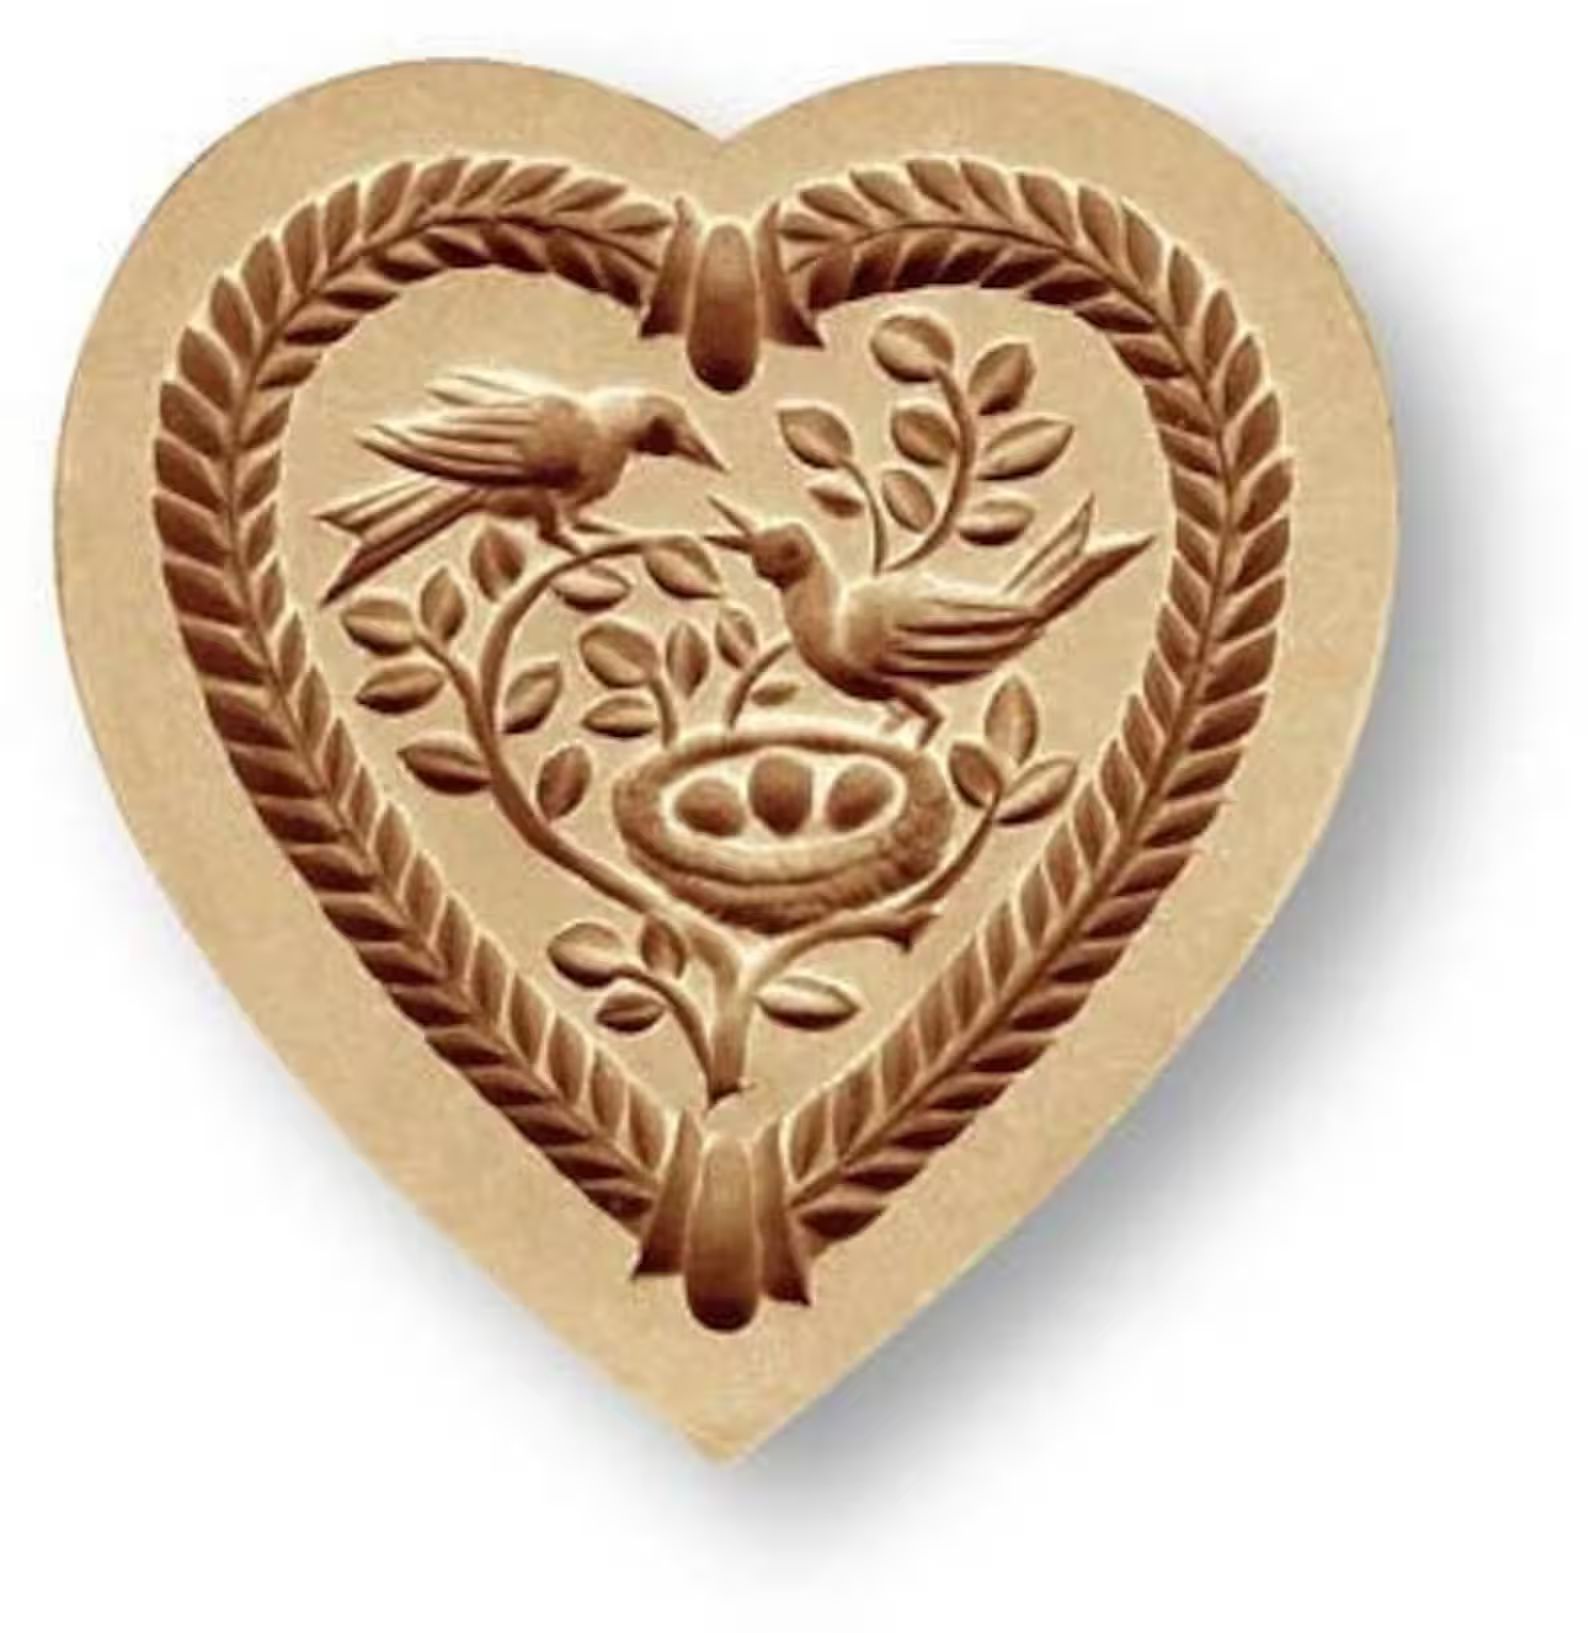 Heart With Bird Family Springerle Cookie Mold by Anis-paradies 5126 - Etsy | Etsy (US)